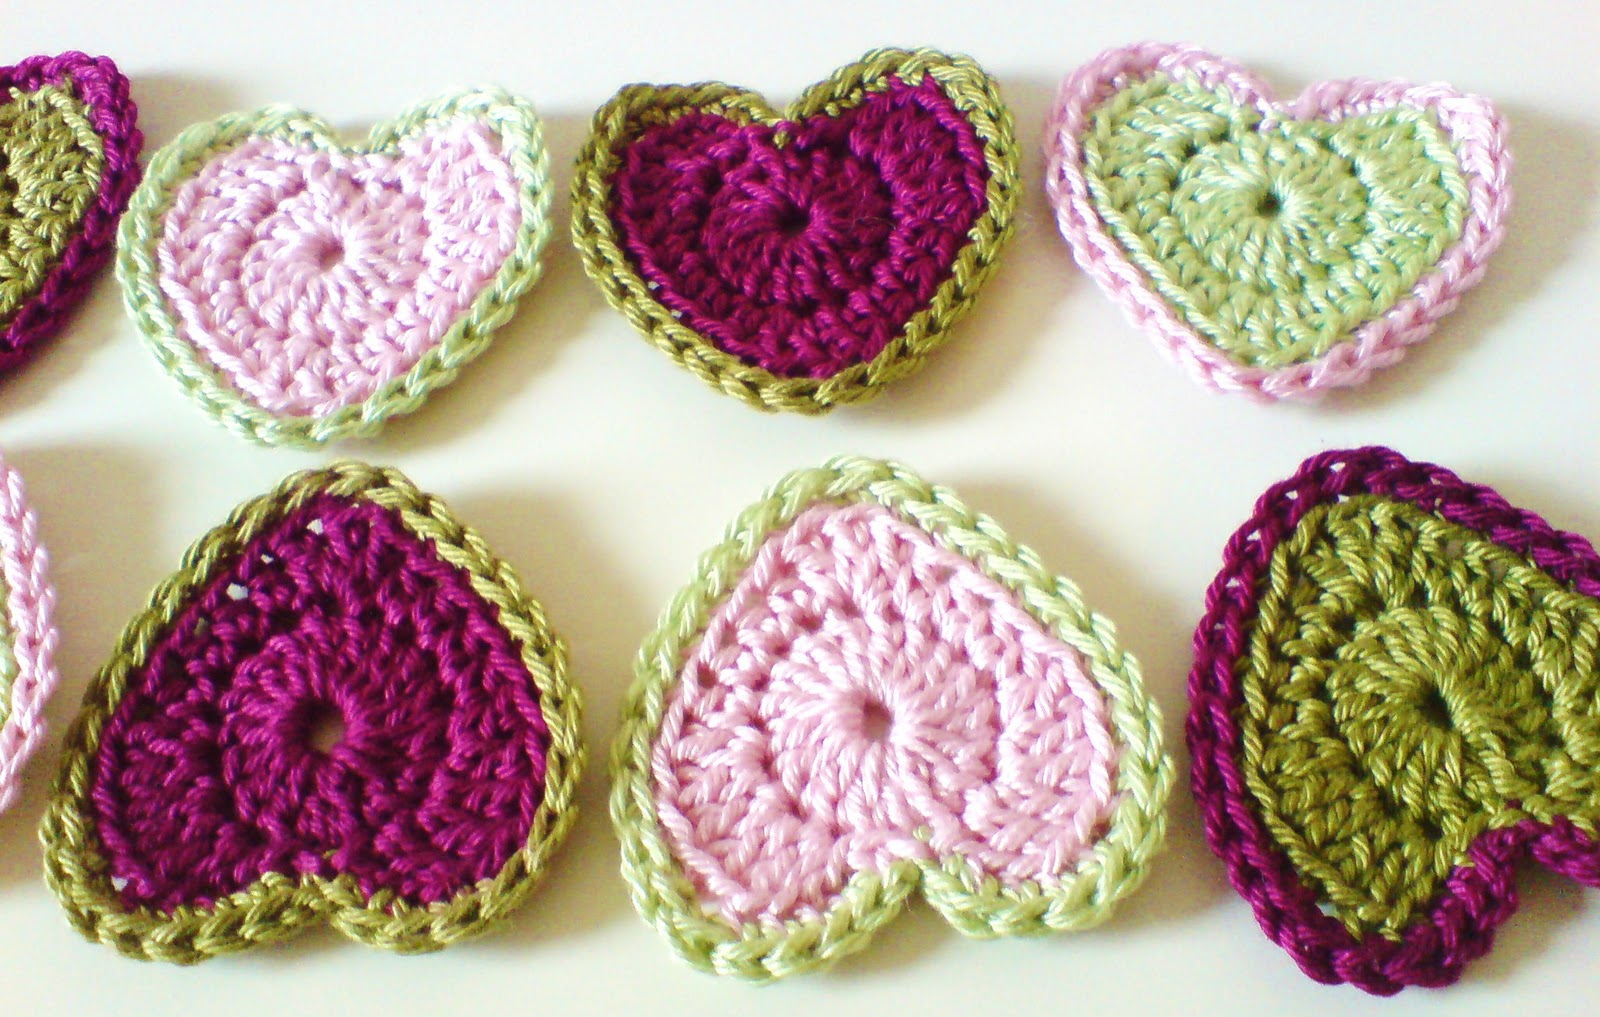 Crochet Heart Patterns Microcknit Creations Perfect Hearts Filling You With Love